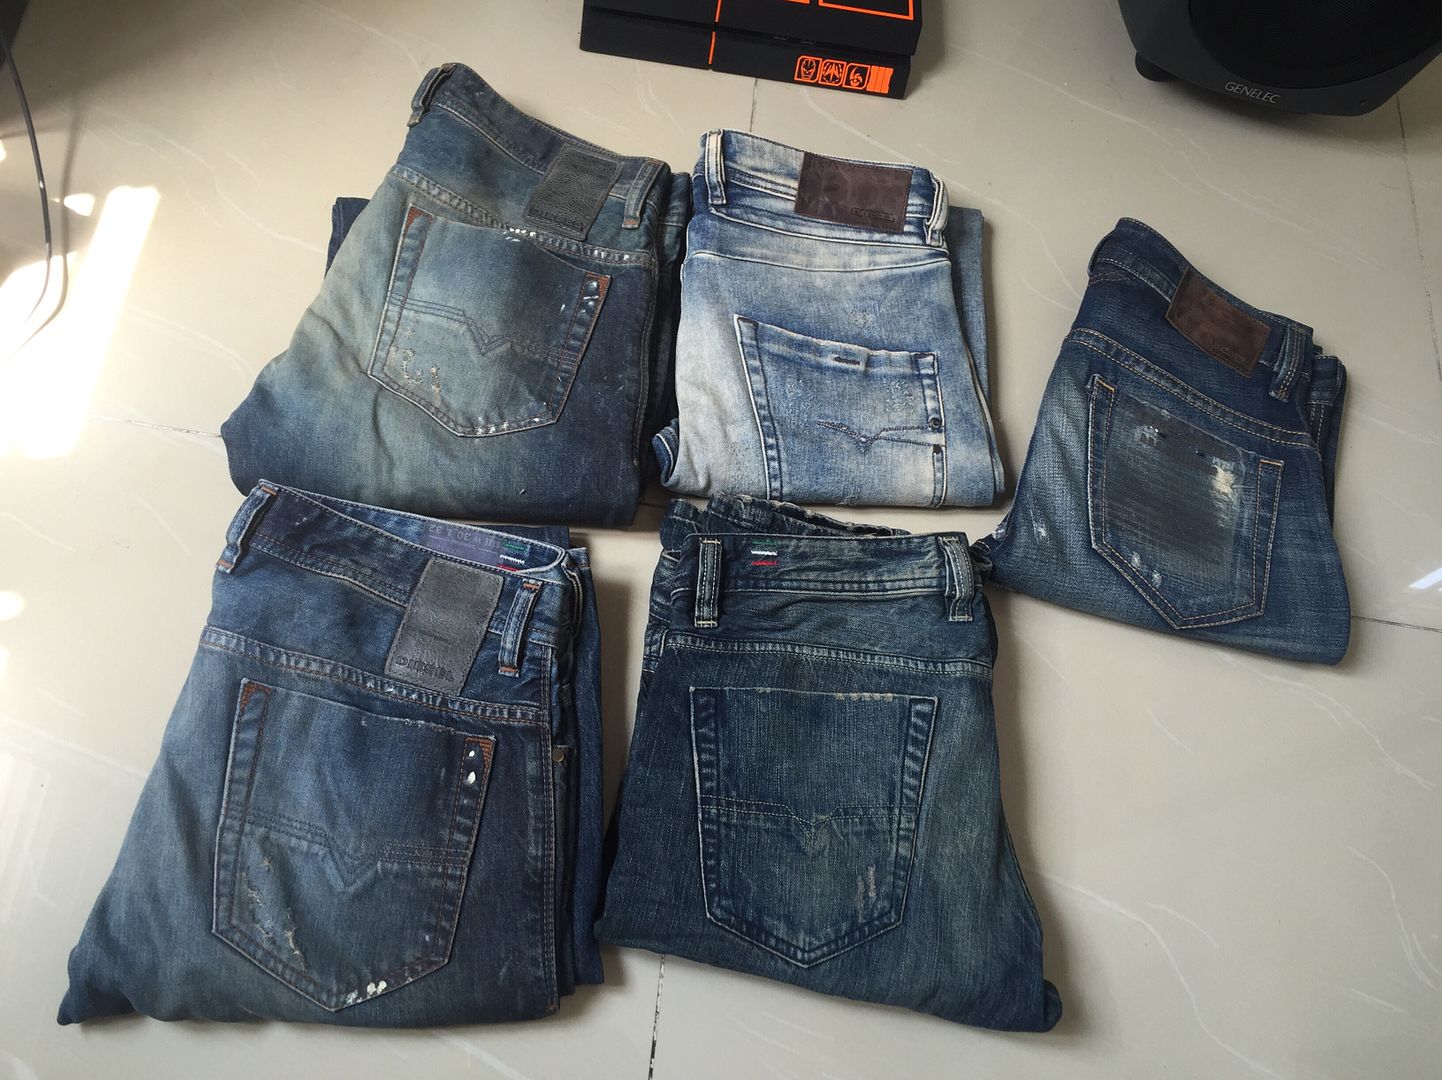 Diesel jeans limited edition - 5